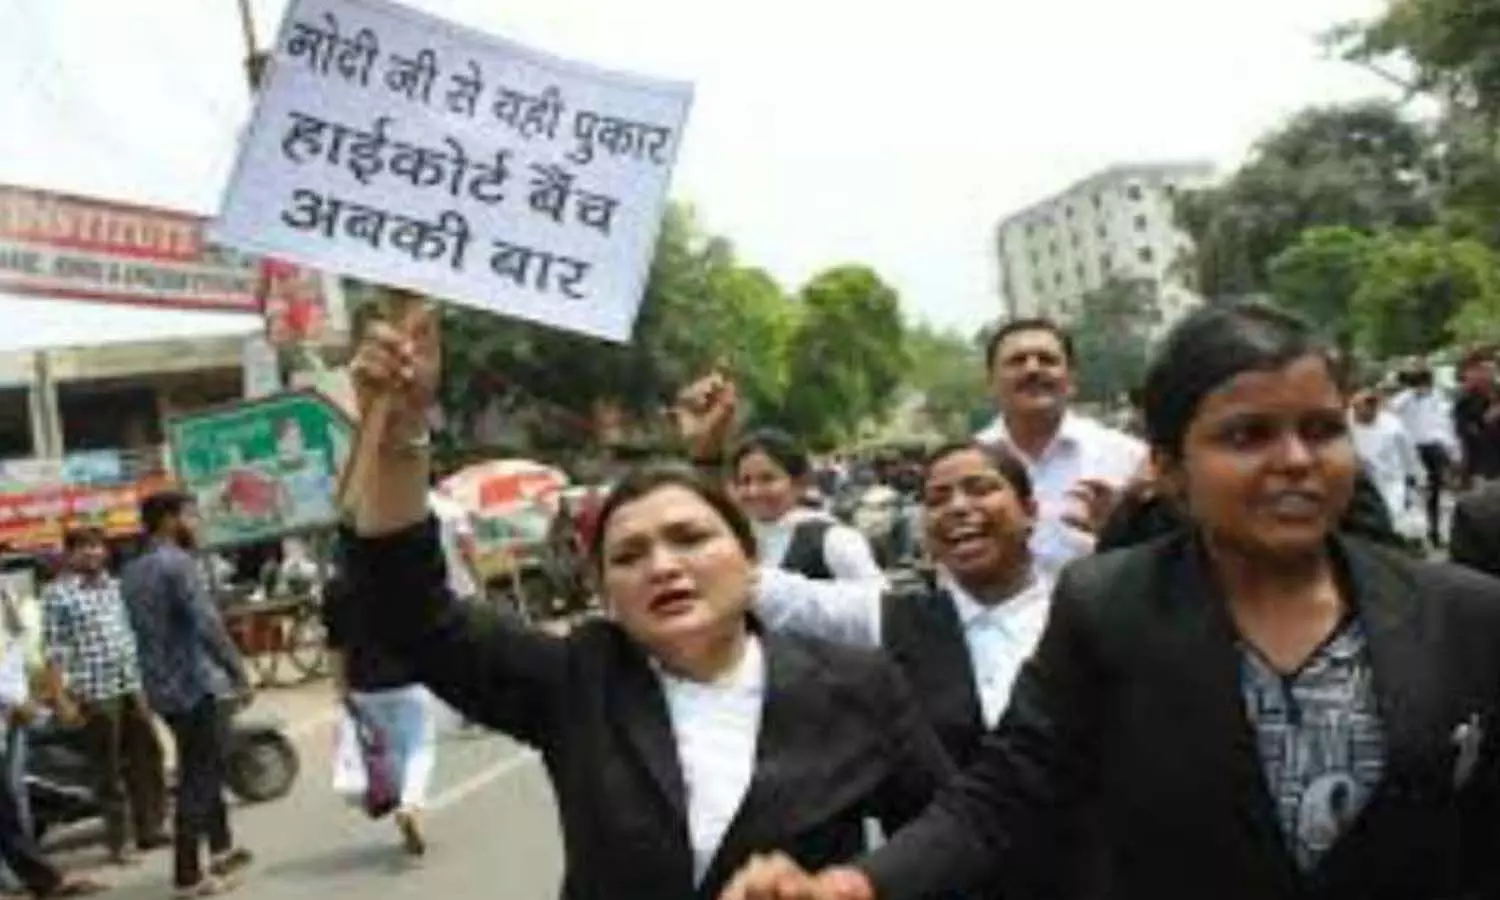 Meerut News: The demand of the High Court bench in western Uttar Pradesh has become a demand that will never be fulfilled